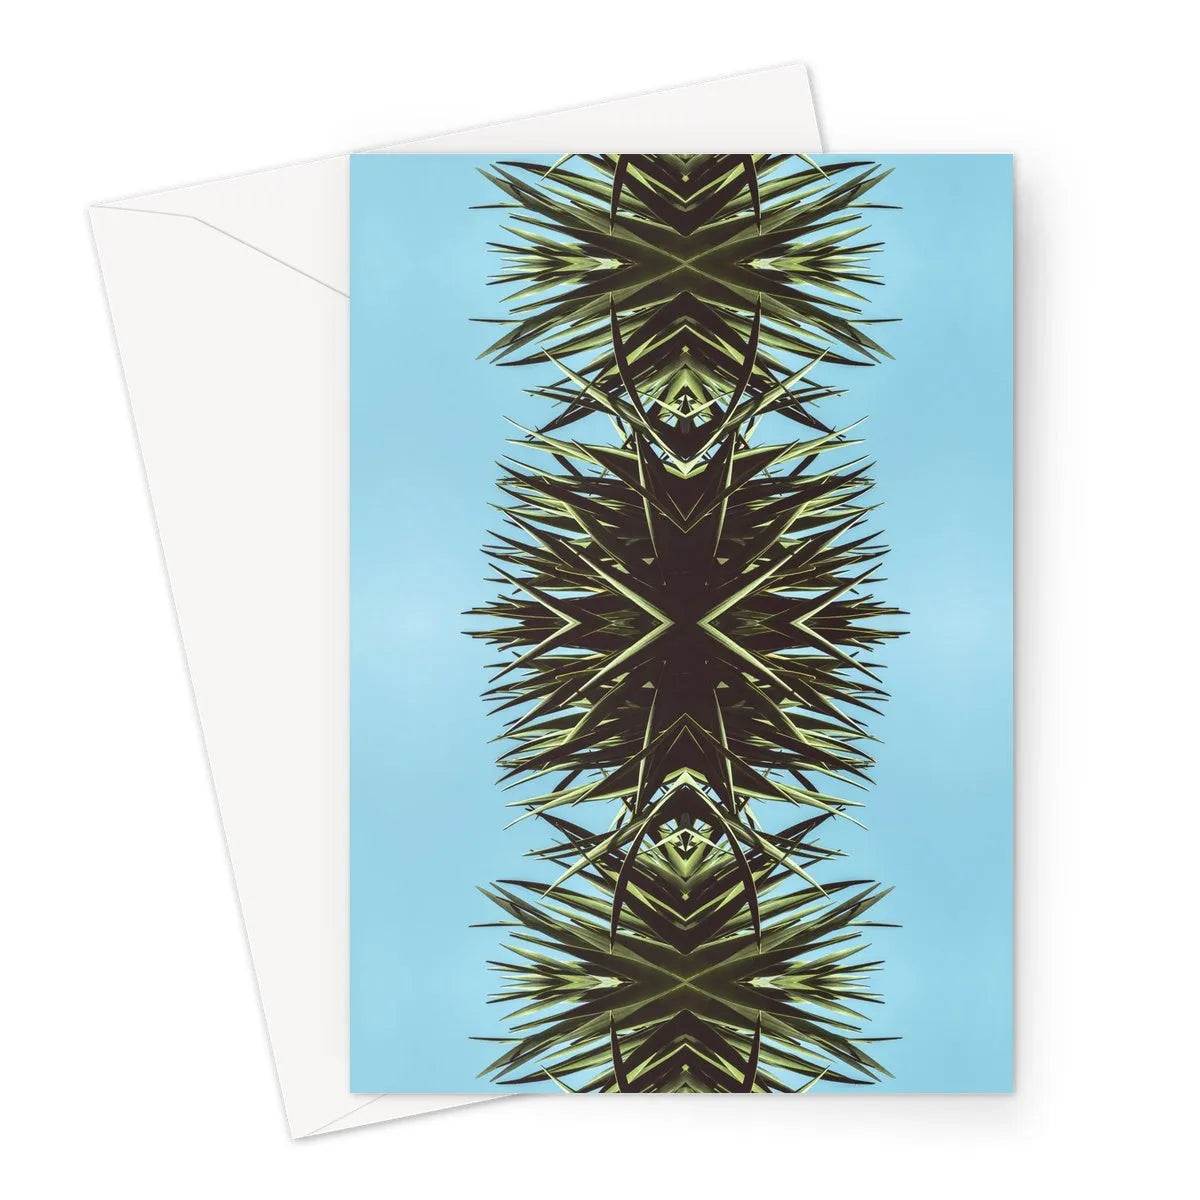 Pointy Greeting Card - A5 Portrait / 10 Cards - Greeting & Note Cards - Aesthetic Art